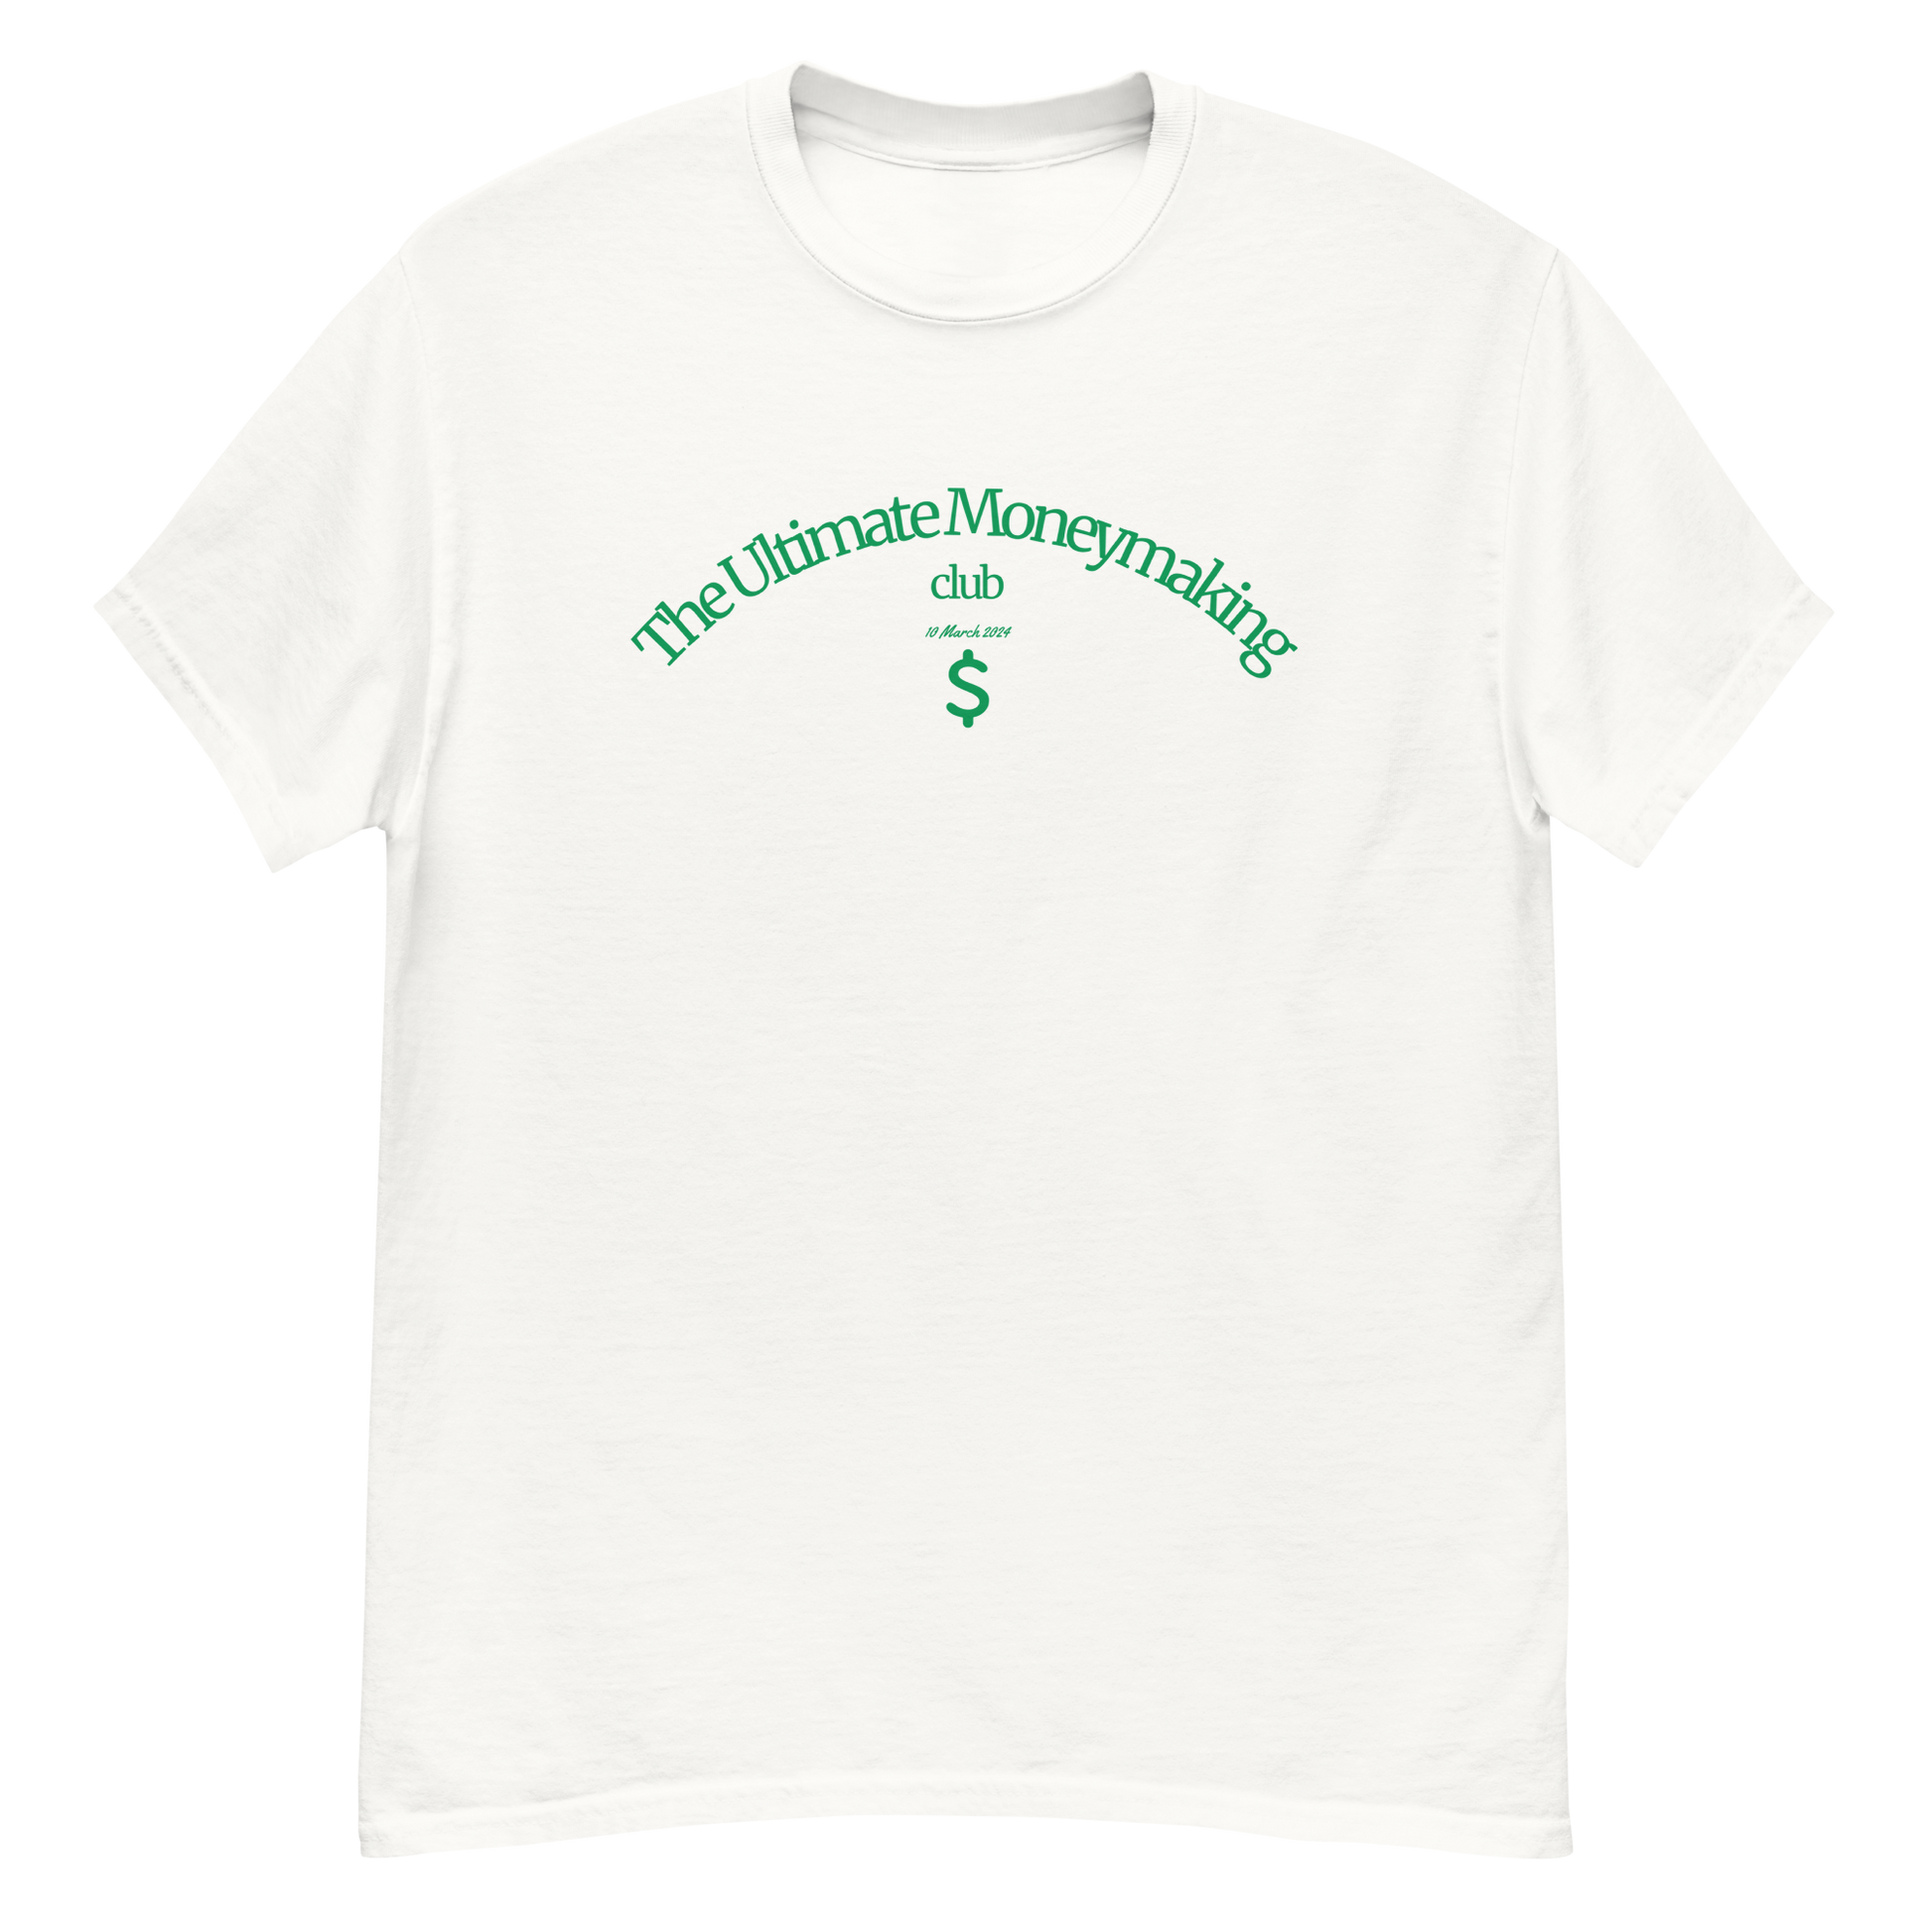 A White T-shirt featuring the Ultimate Moneymaking Club logo, symbolizing success, hustle, and wealth.